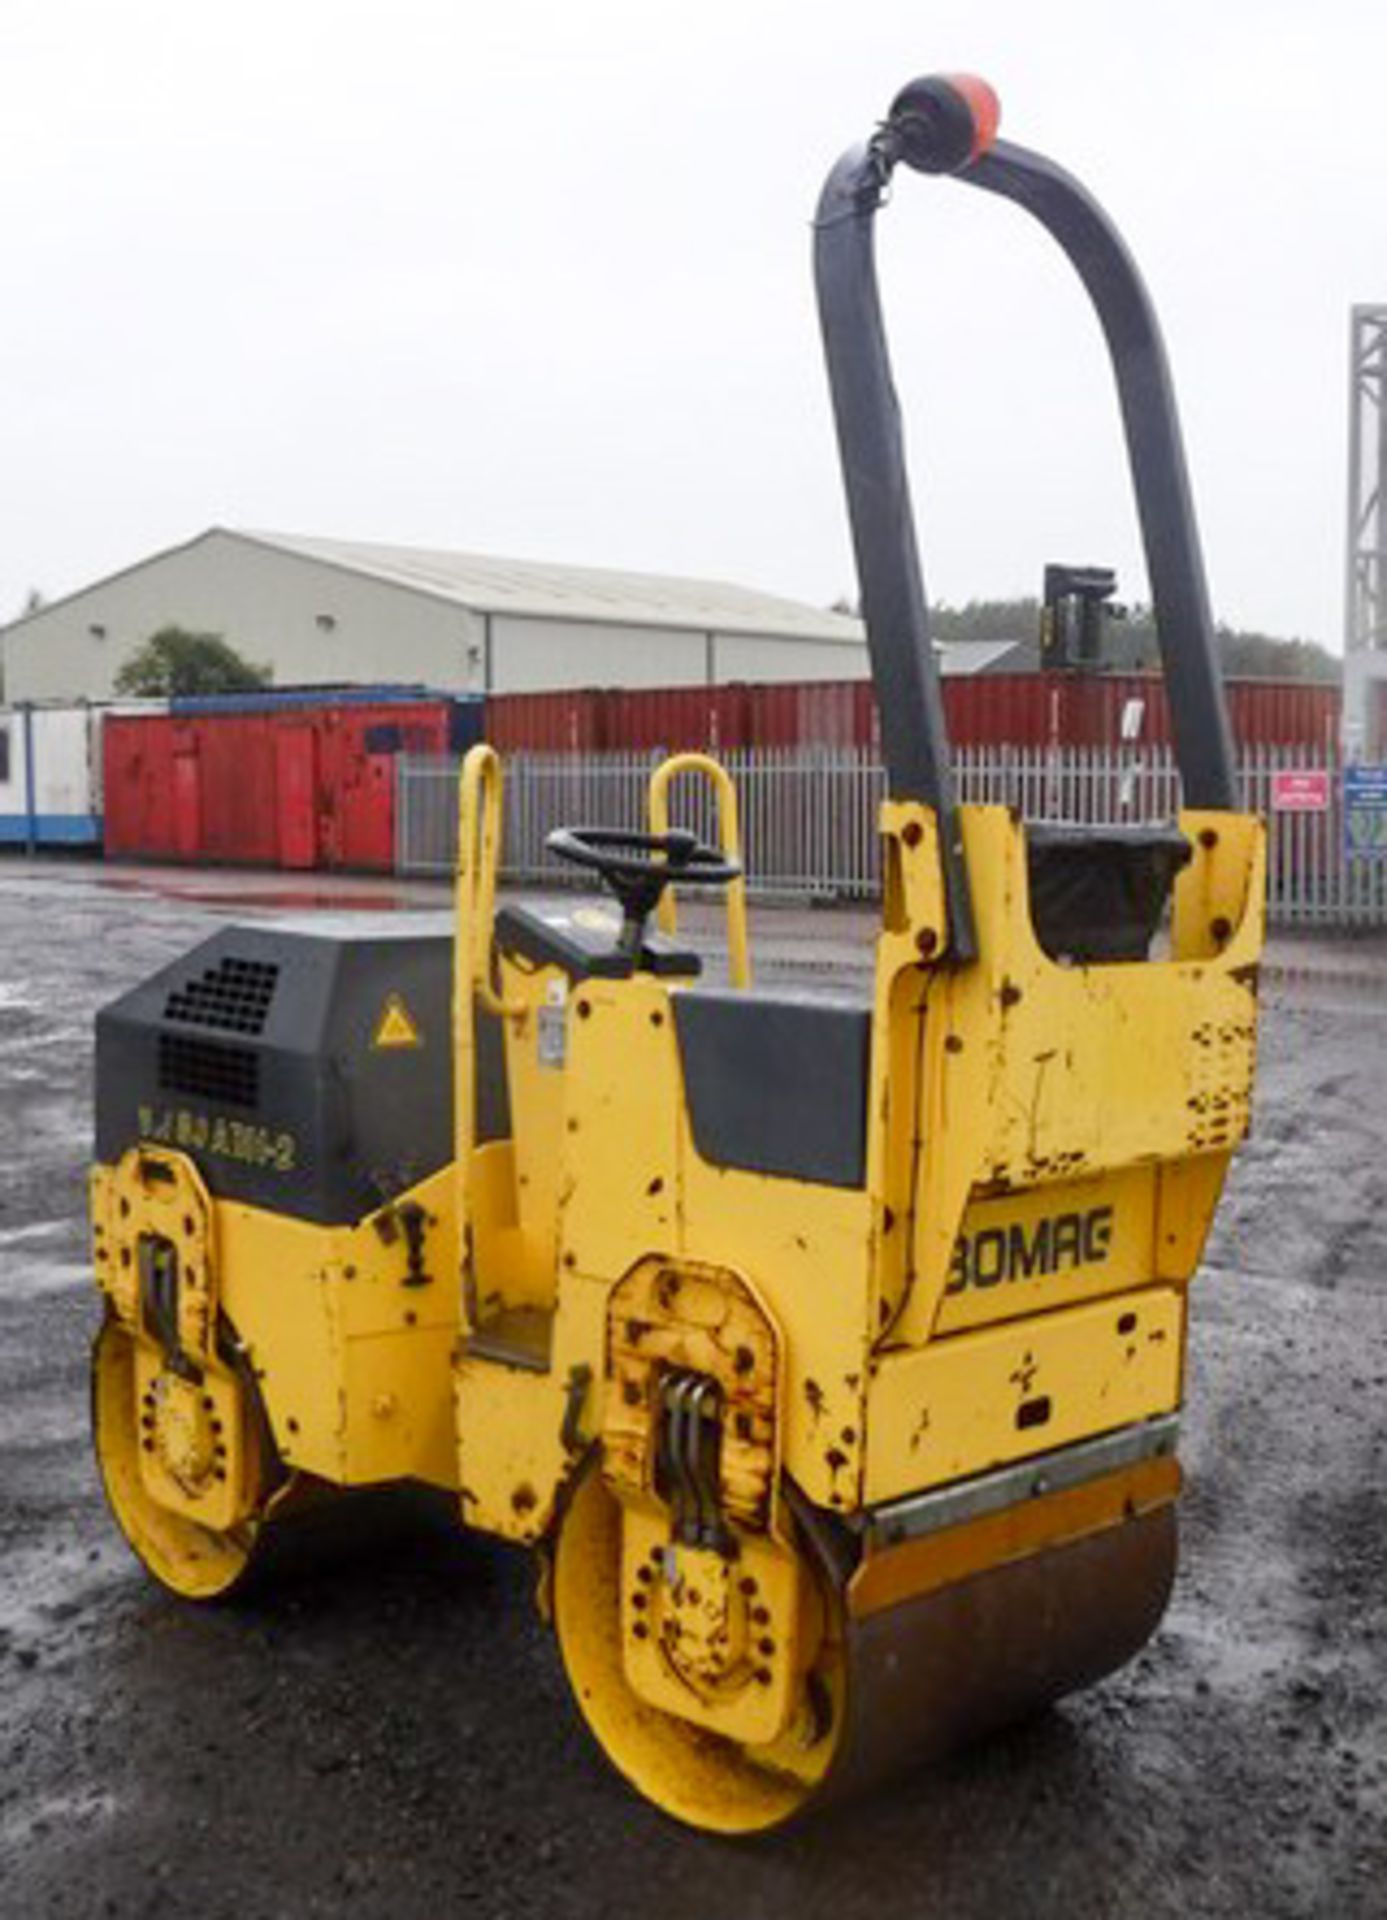 BOMAG BW80 ADH-2 roller. S/N 101460426169. 585hrs (not verified) - Image 10 of 12